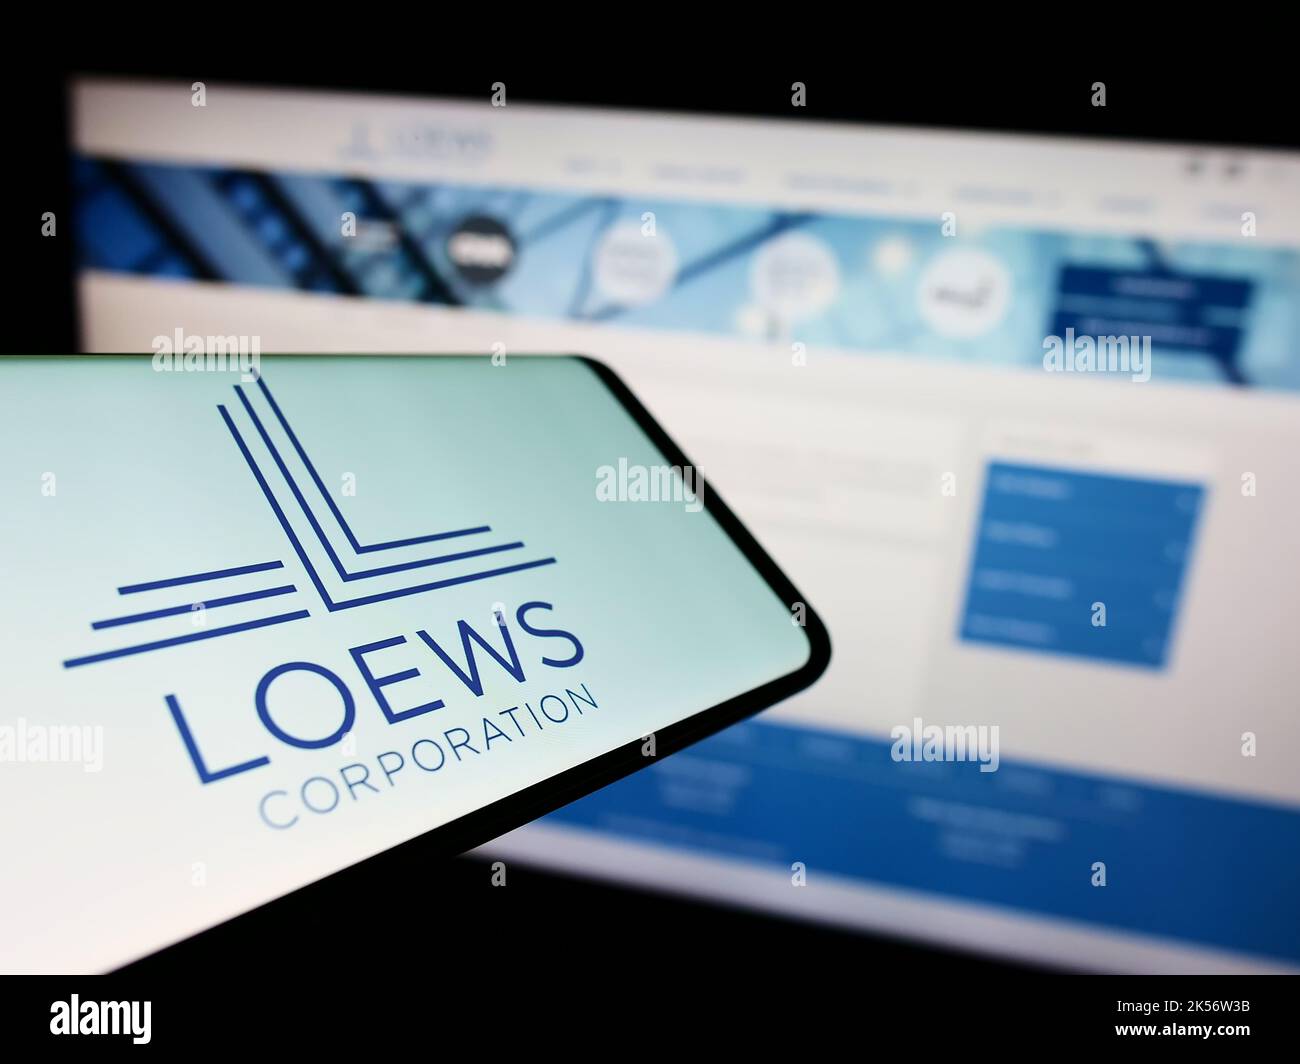 Mobile phone with logo of American conglomerate Loews Corporation on screen in front of company website. Focus on center-right of phone display. Stock Photo